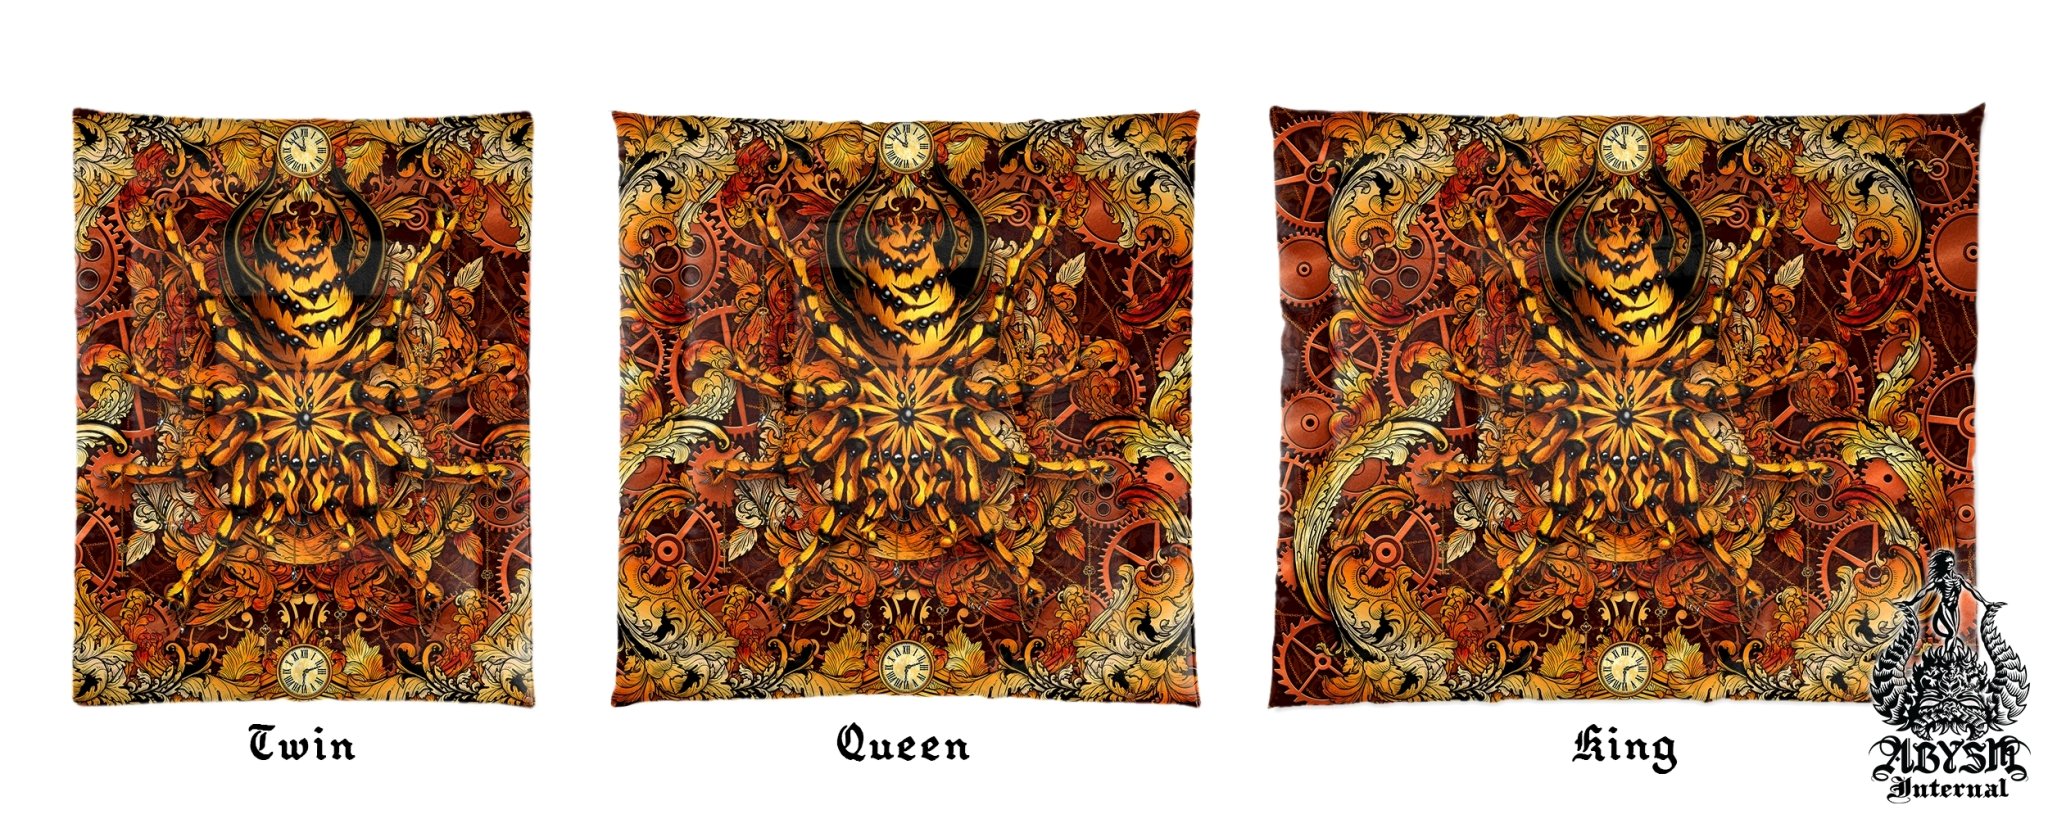 Steampunk Bedding Set, Comforter and Duvet, Bed Cover and Bedroom Decor, King, Queen and Twin Size - Tarantula Spider - Abysm Internal